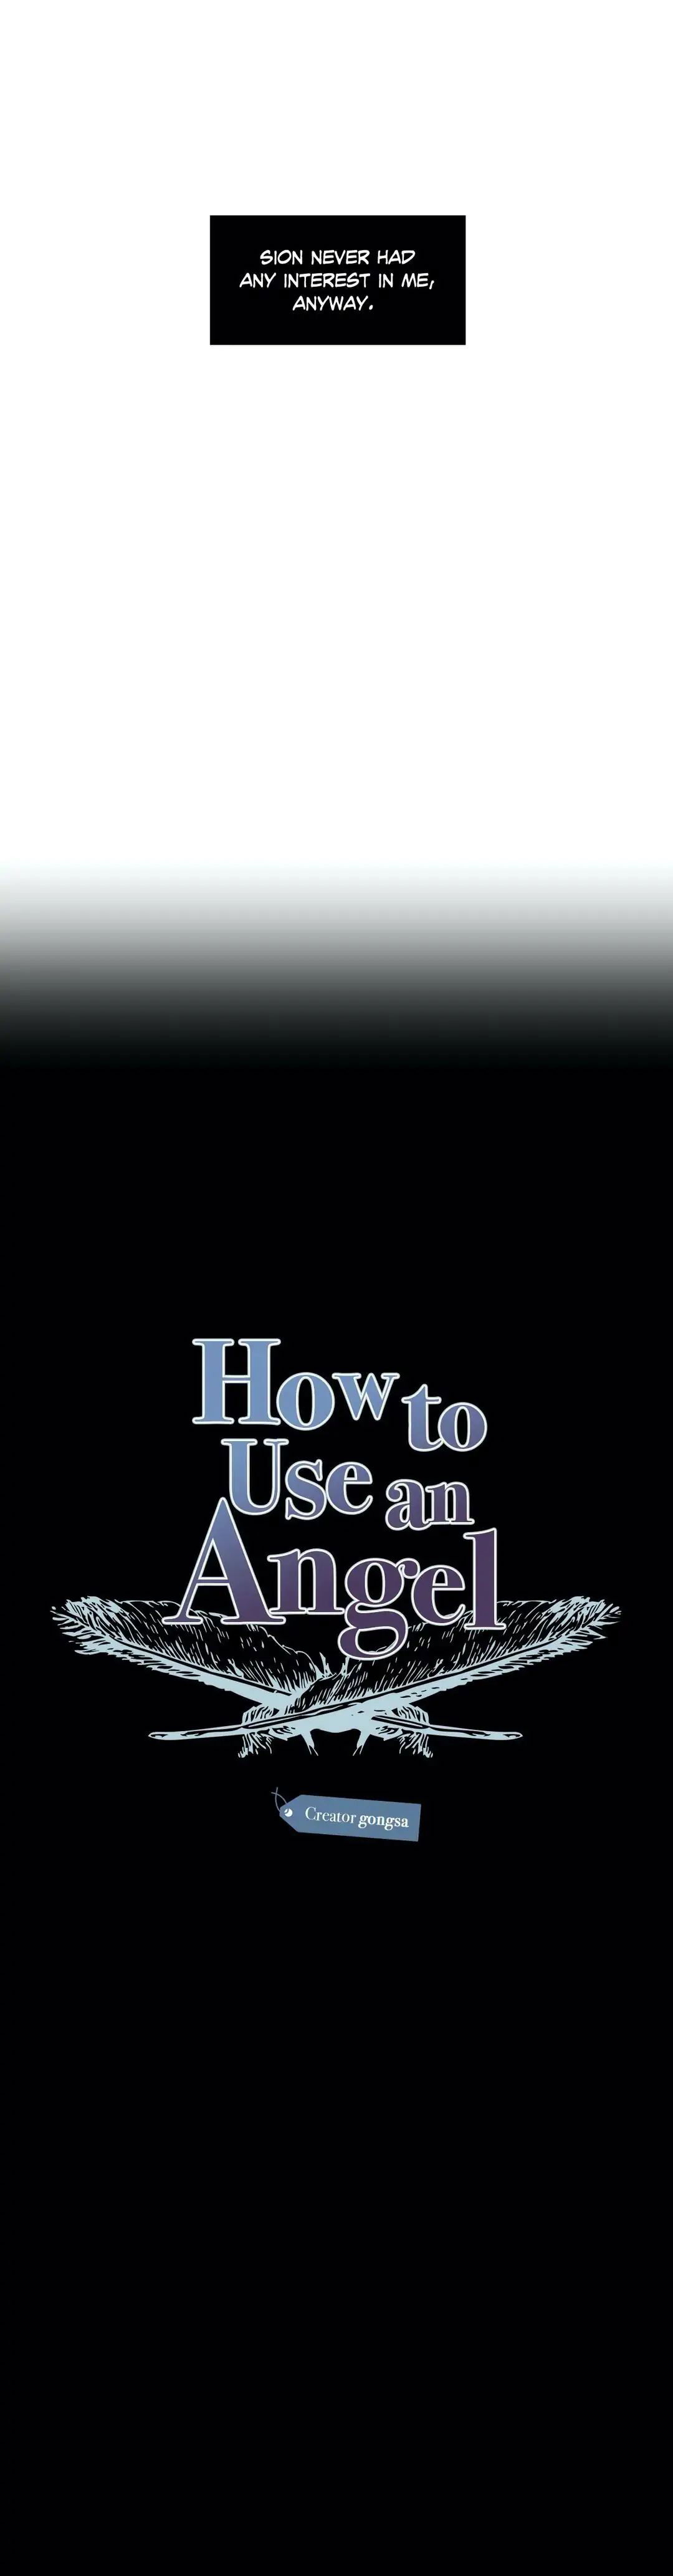 how-to-use-an-angel-chap-45-6